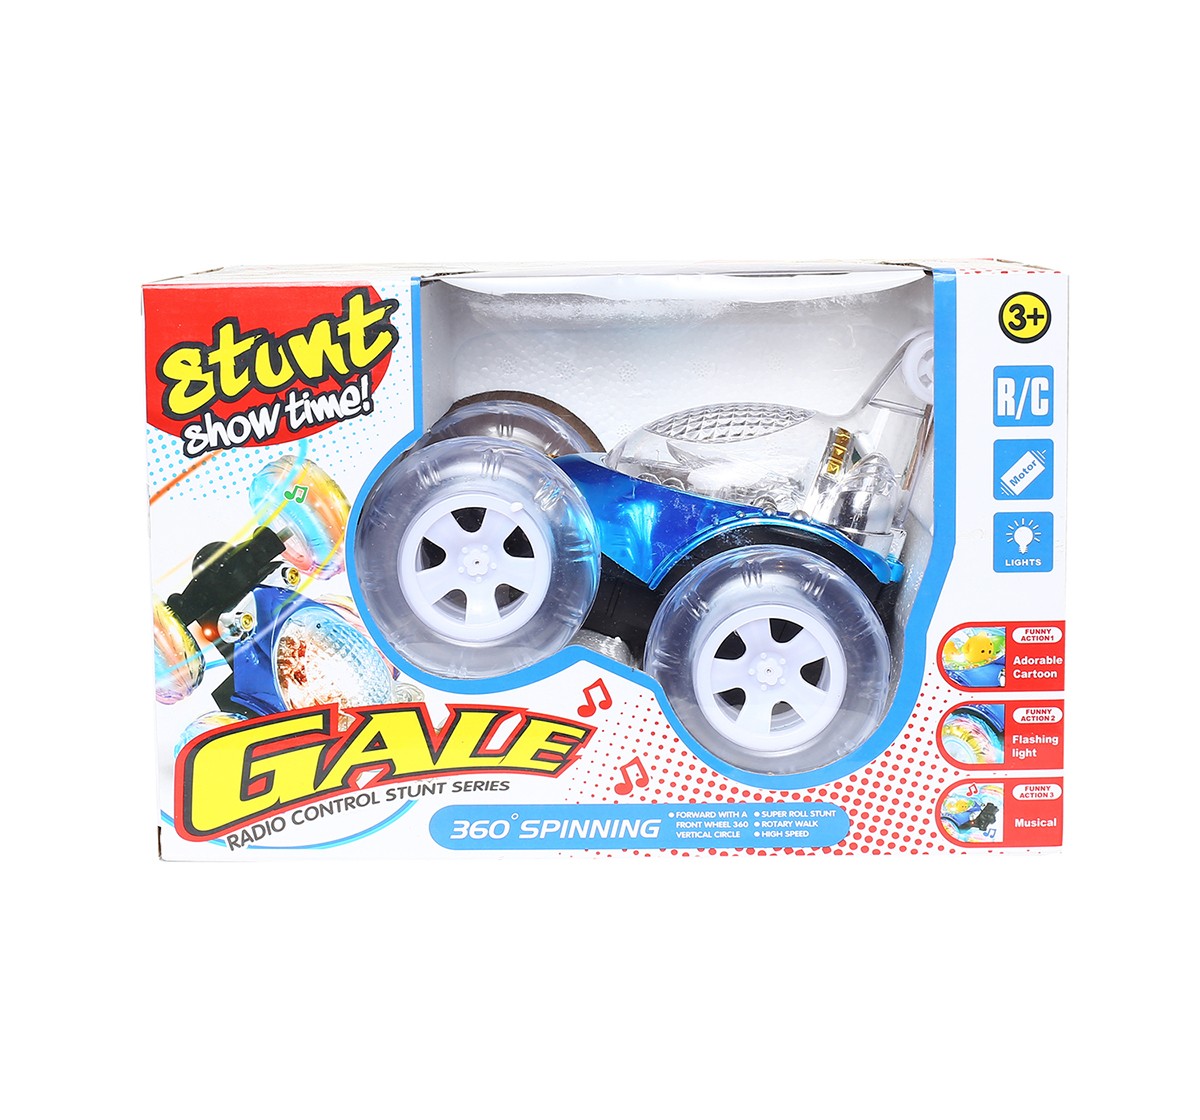 Gale Comdaq Gale Stunt Car With Remote Control 360 Spinning Remote Control Toys for Kids age 3Y+ 